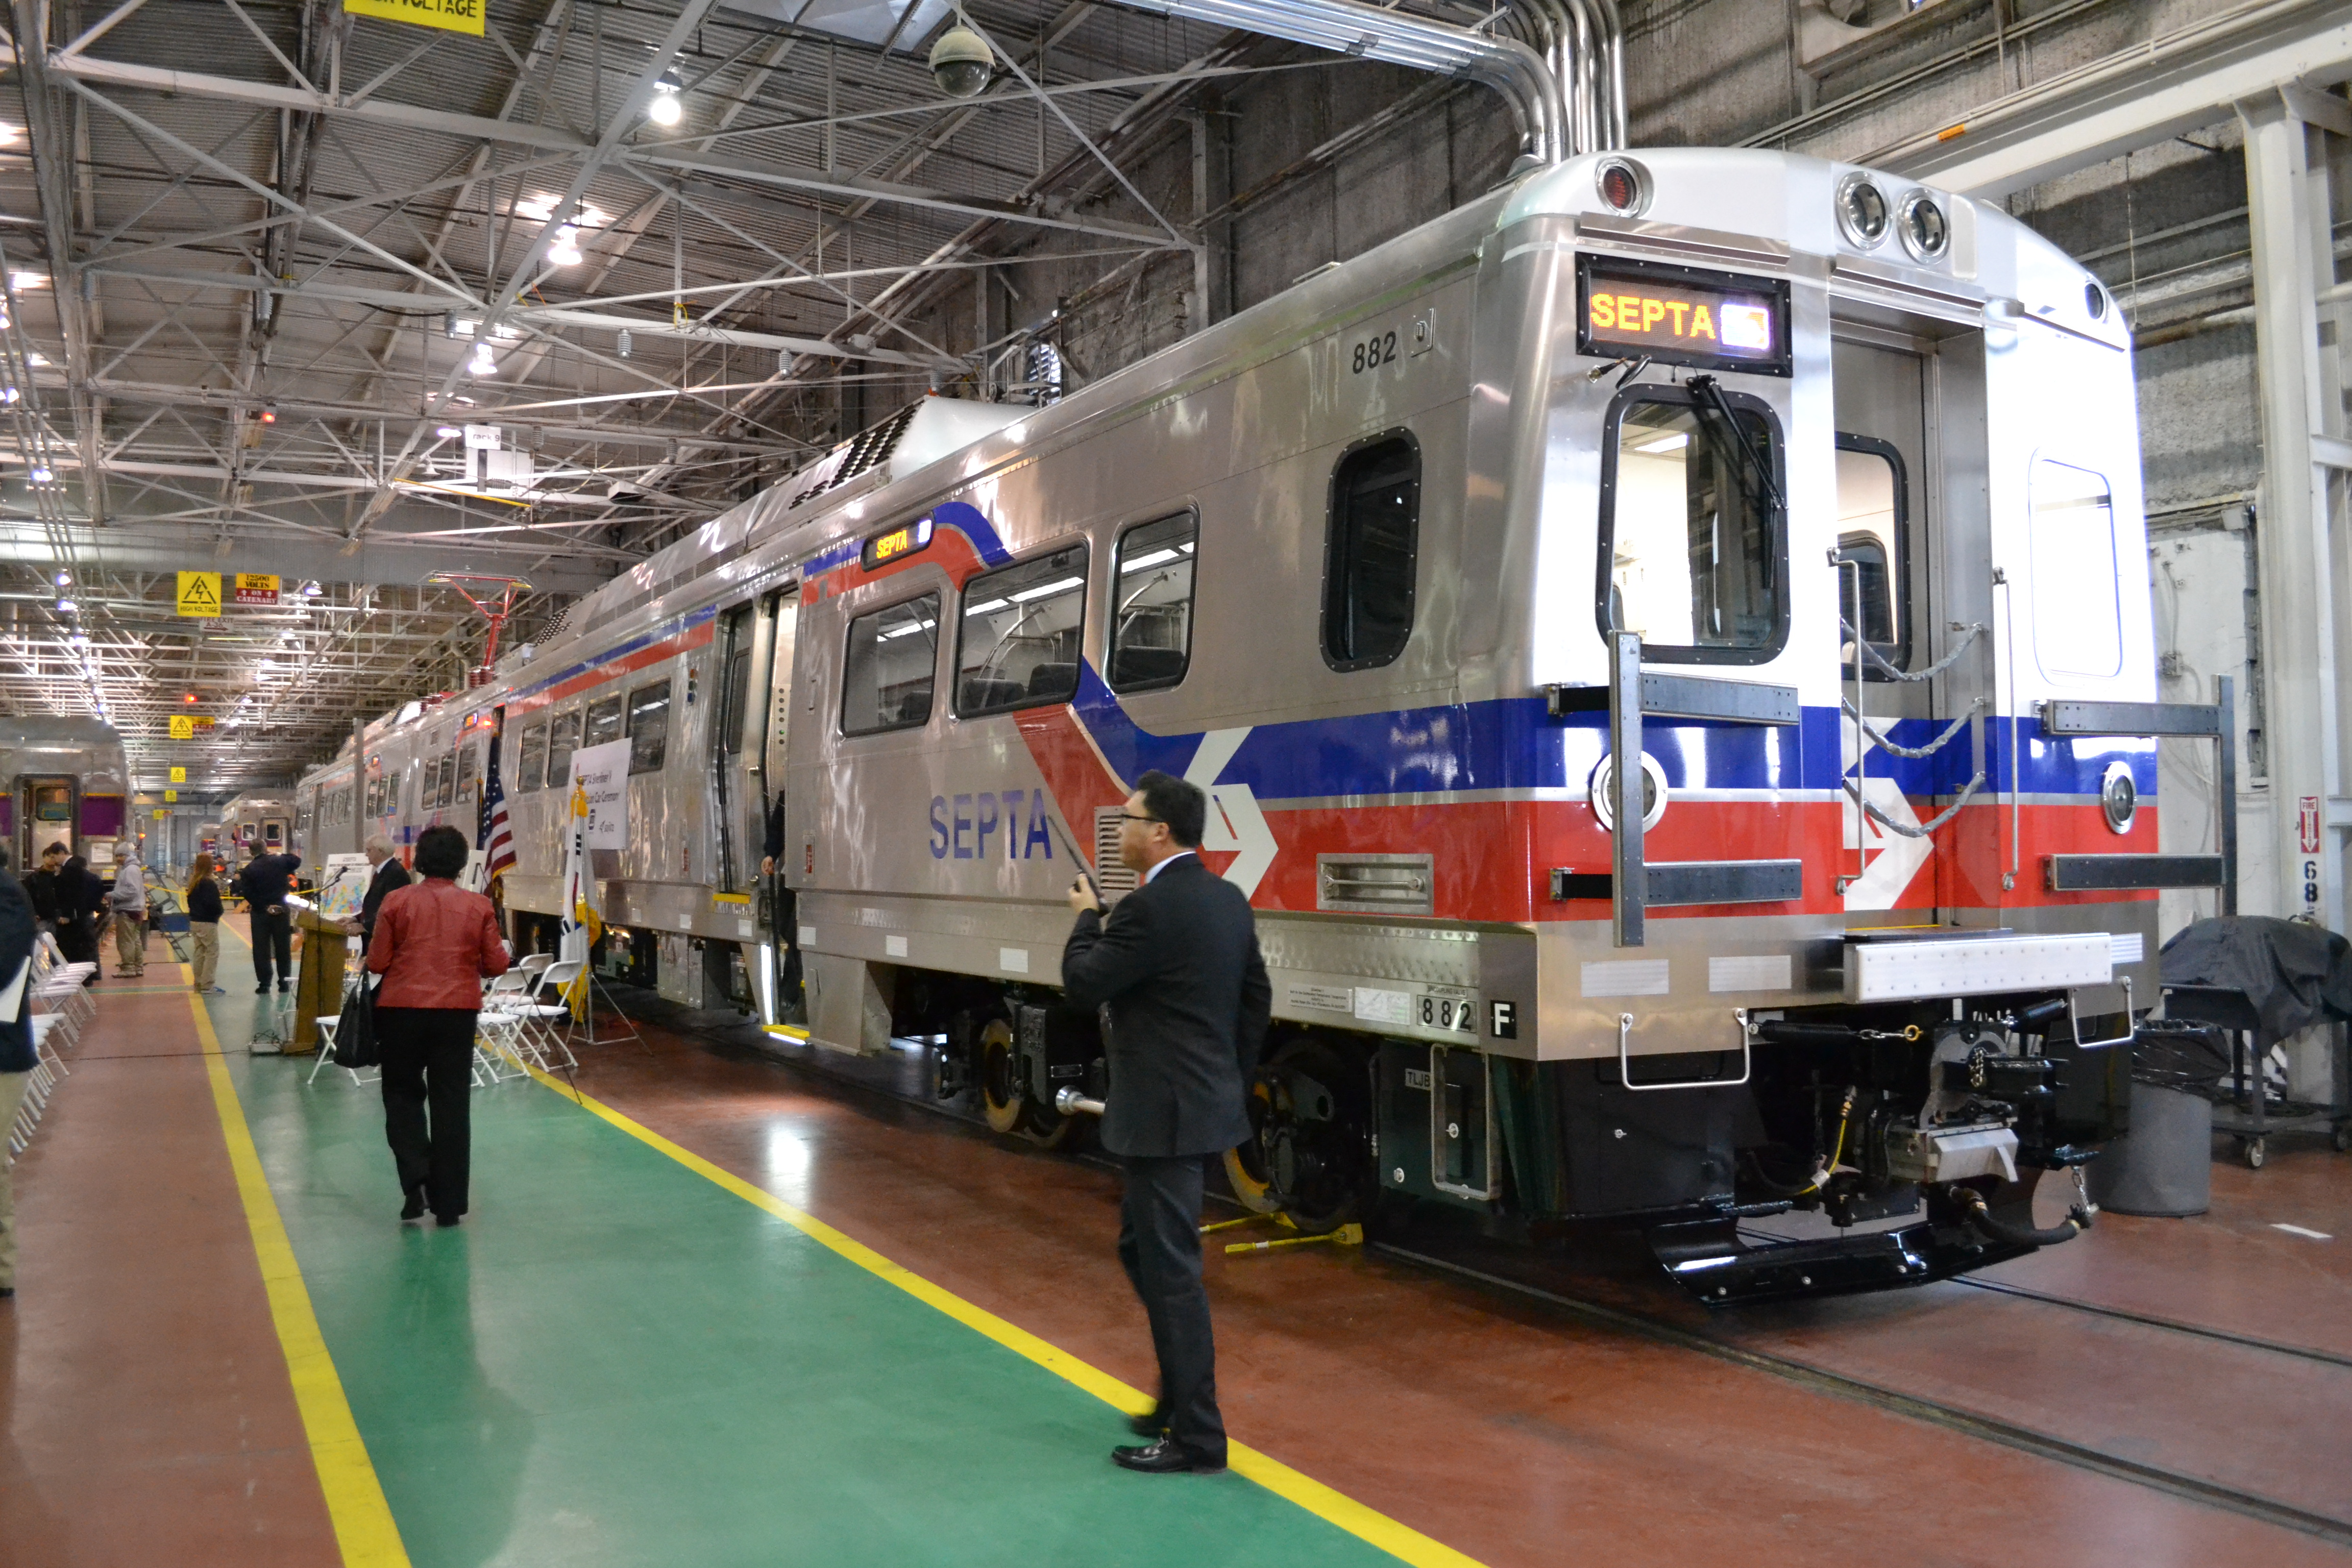 This week SEPTA celebrated the completion of its 120-car Silverliner V order